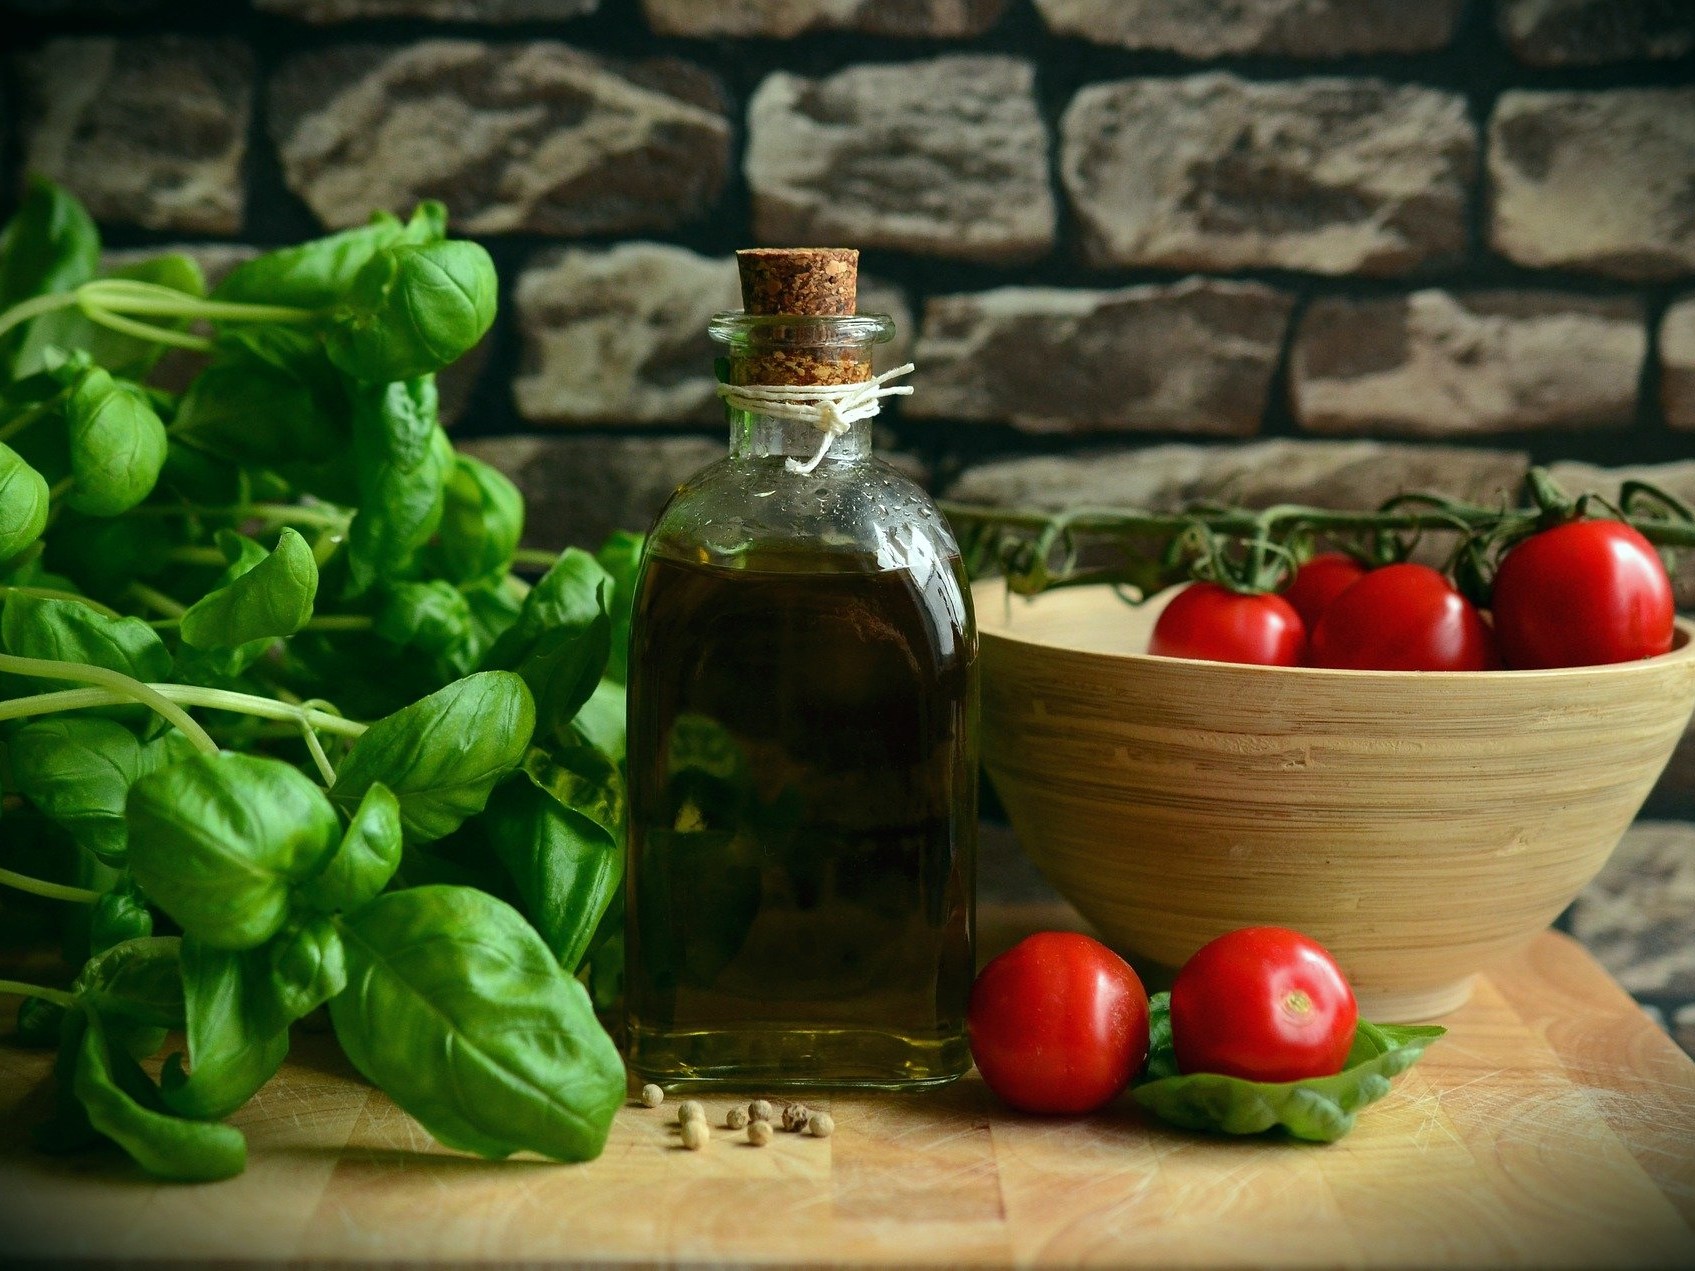 Mediterranean diet full of polyphenols strengthen the heart and blood vessels